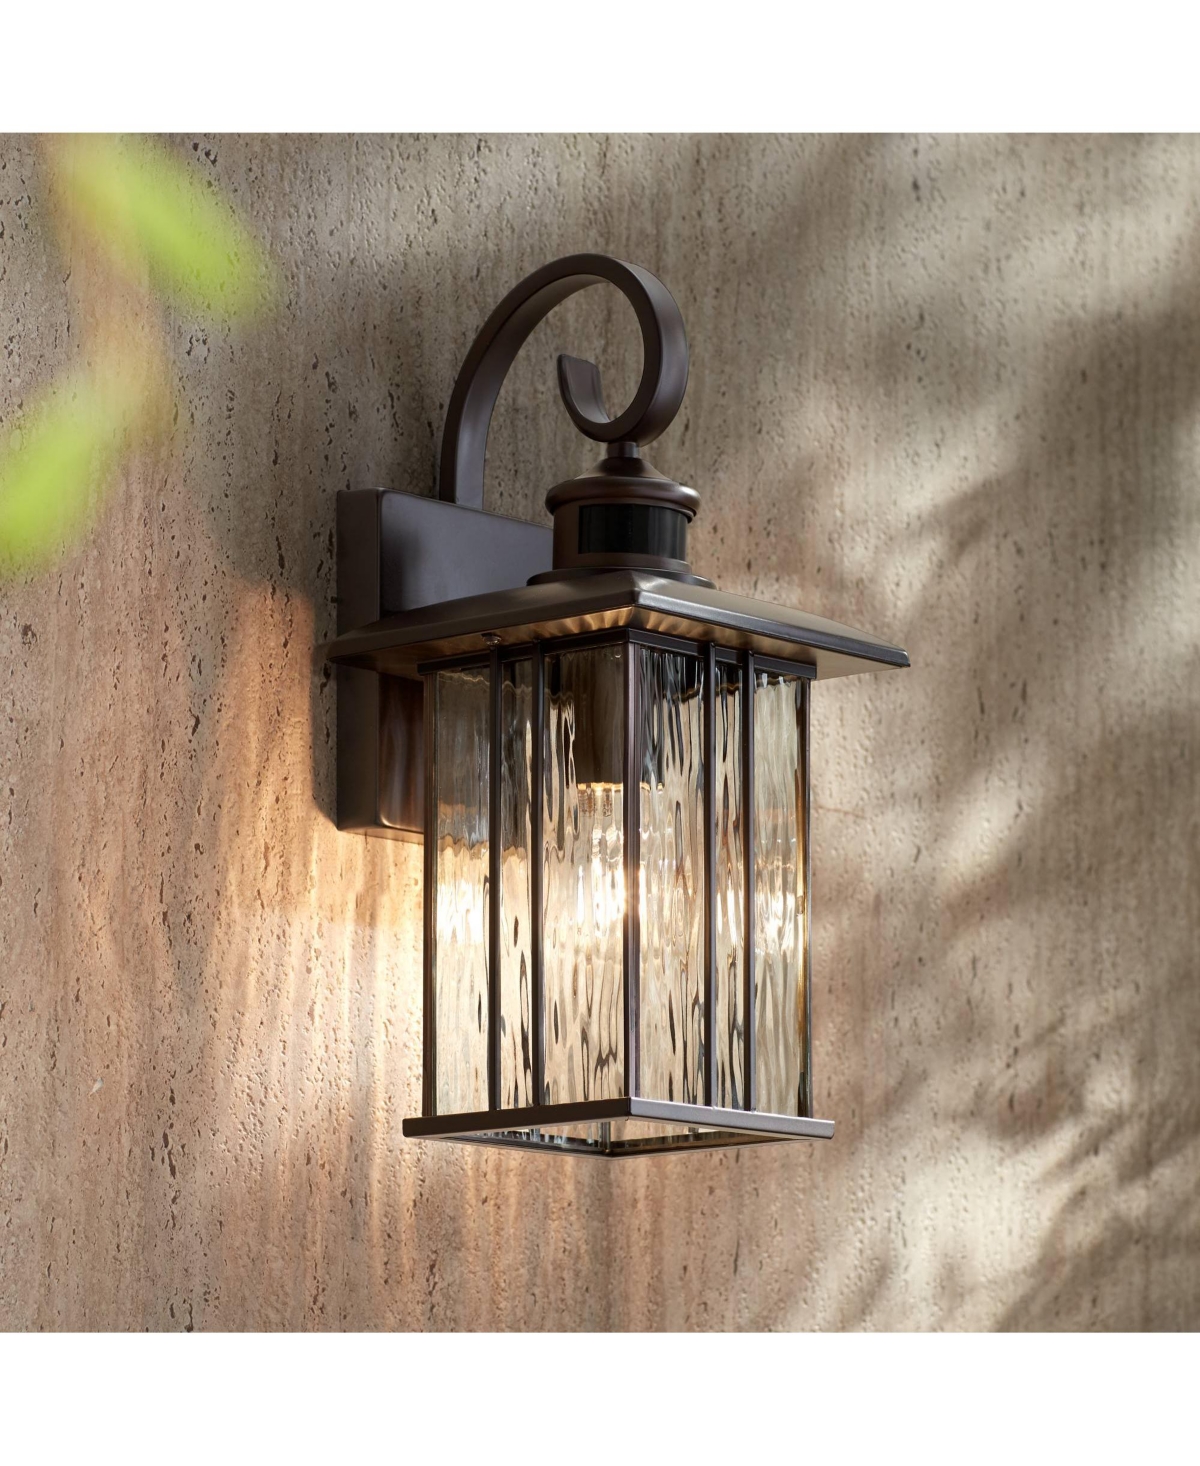 Deaver Modern Outdoor Wall Light Fixture Oil Rubbed Bronze 15 1/4" Clear Water Glass Lantern Dusk to Dawn Motion Security Sensor Exterior House Porch